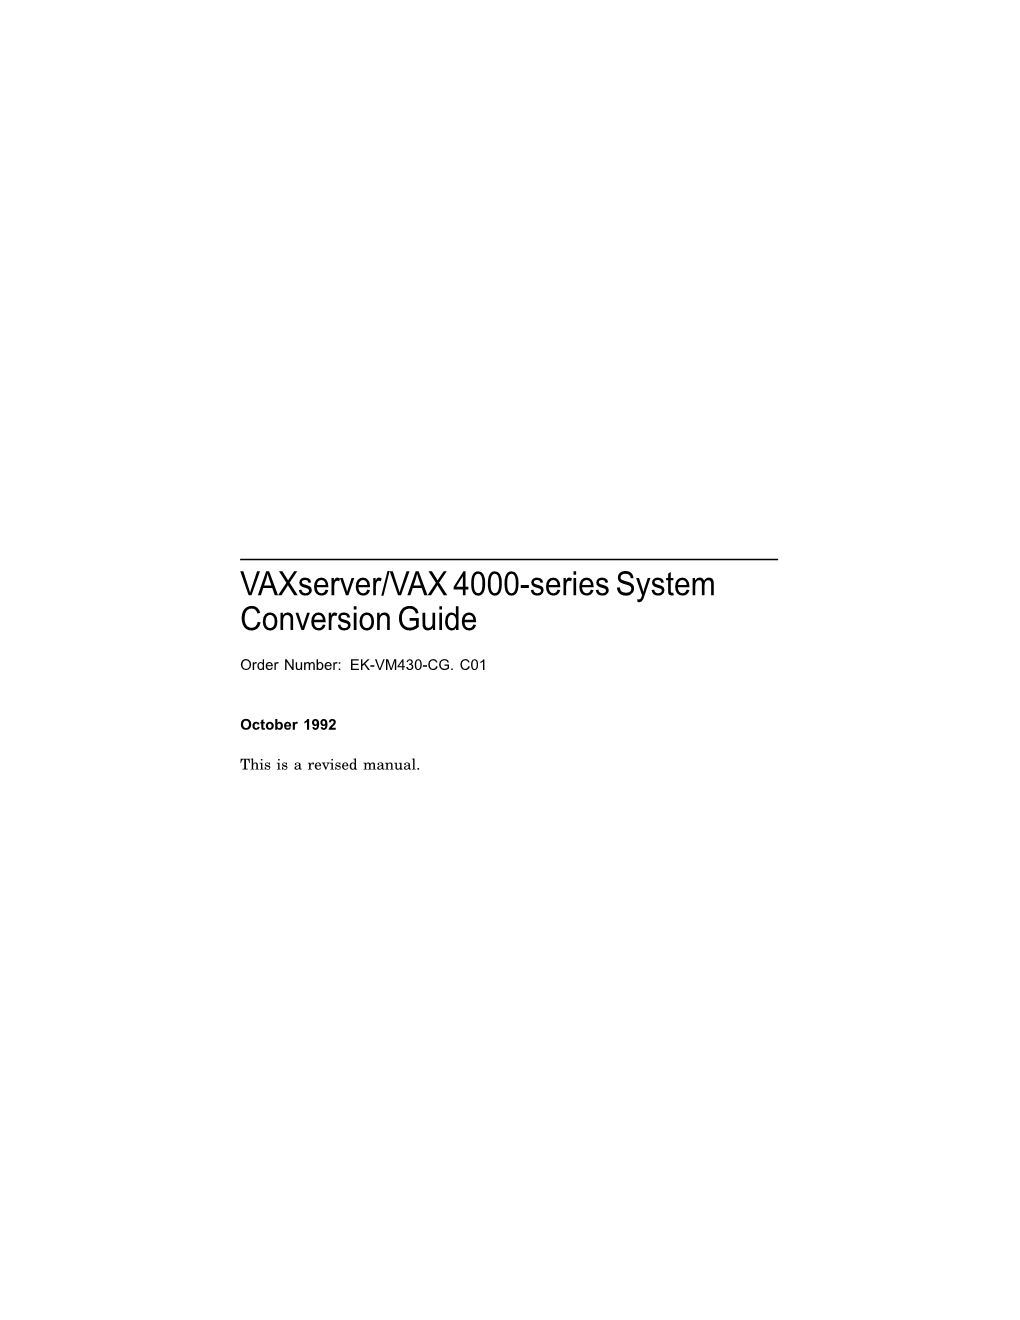 Vaxserver/VAX 4000-Series System Conversion Guide